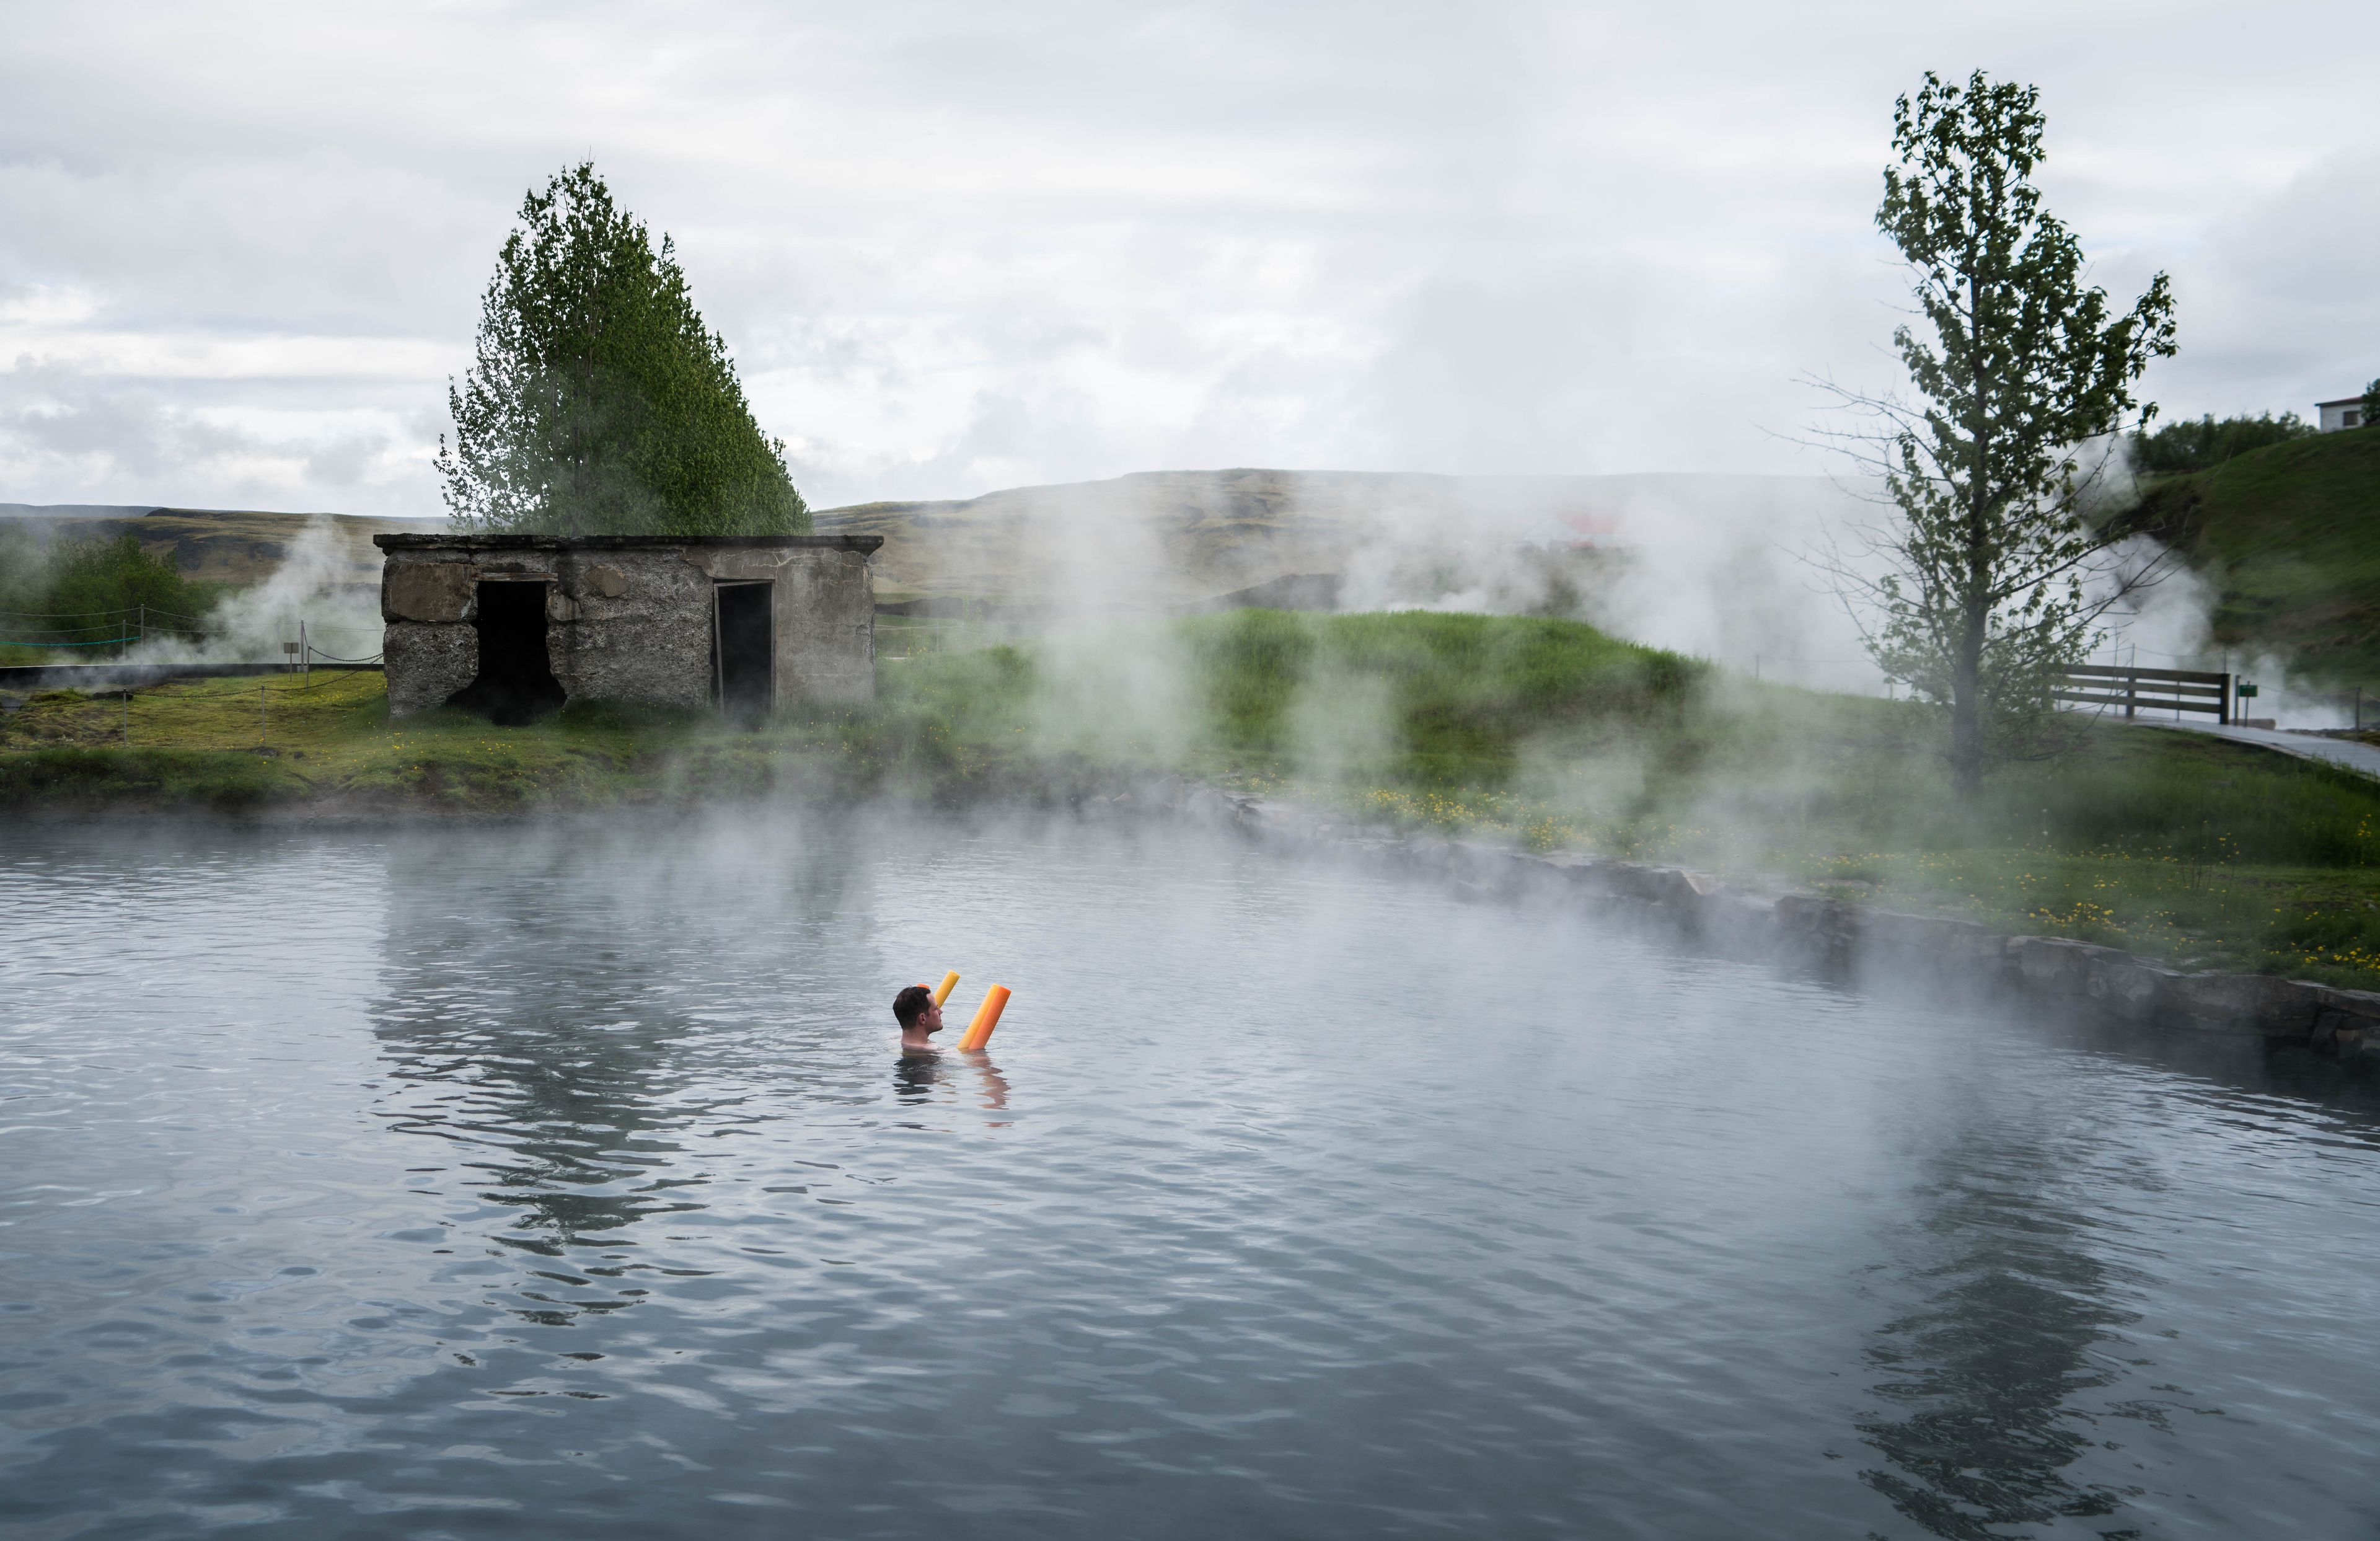 Hot springs in iceland: Secret lagoon, a hot spring  swimming pools located near the golden circle in Iceland